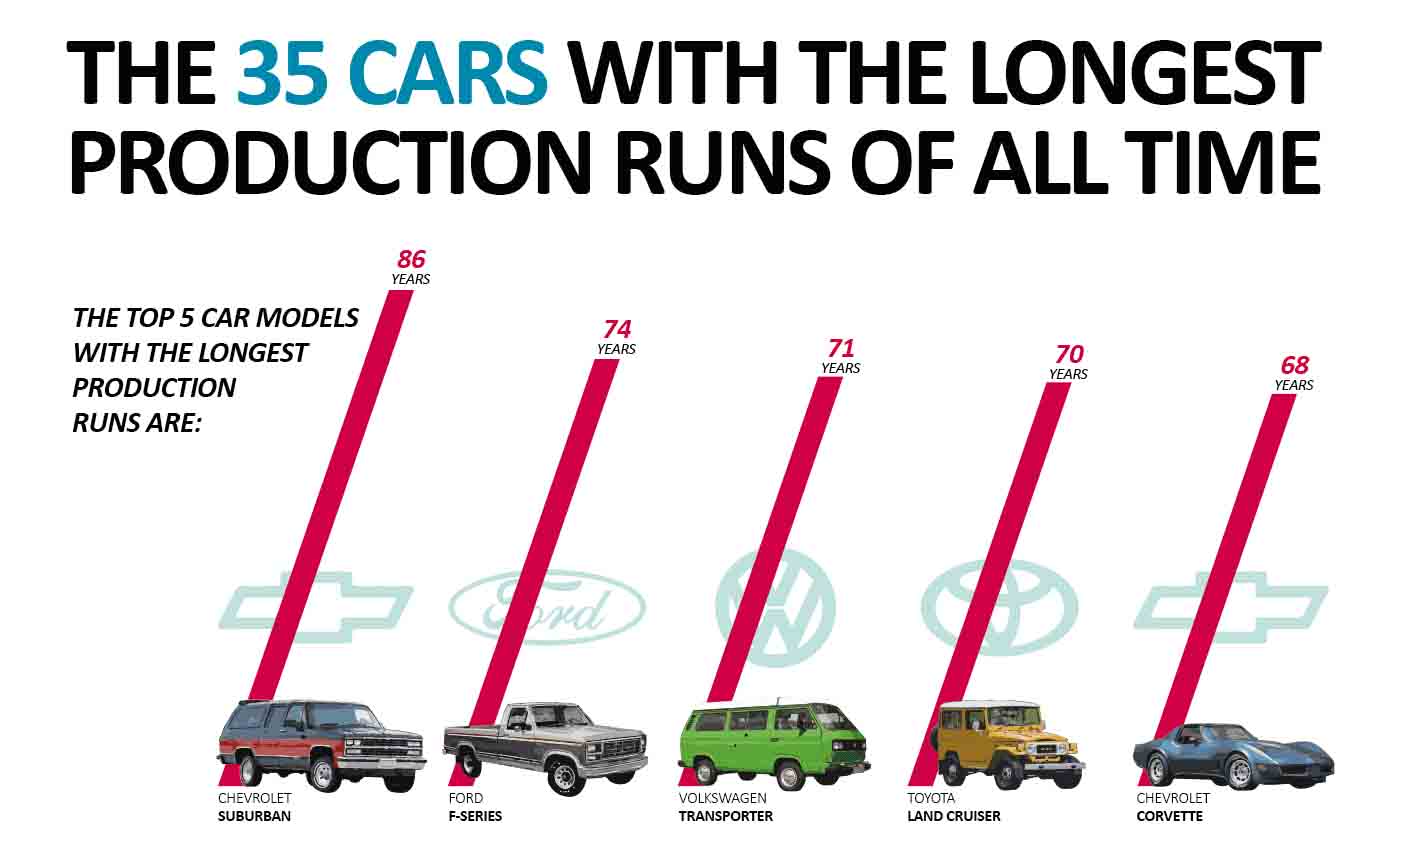 The 35 Cars With the Longest Production Runs of All Time [Infographic]